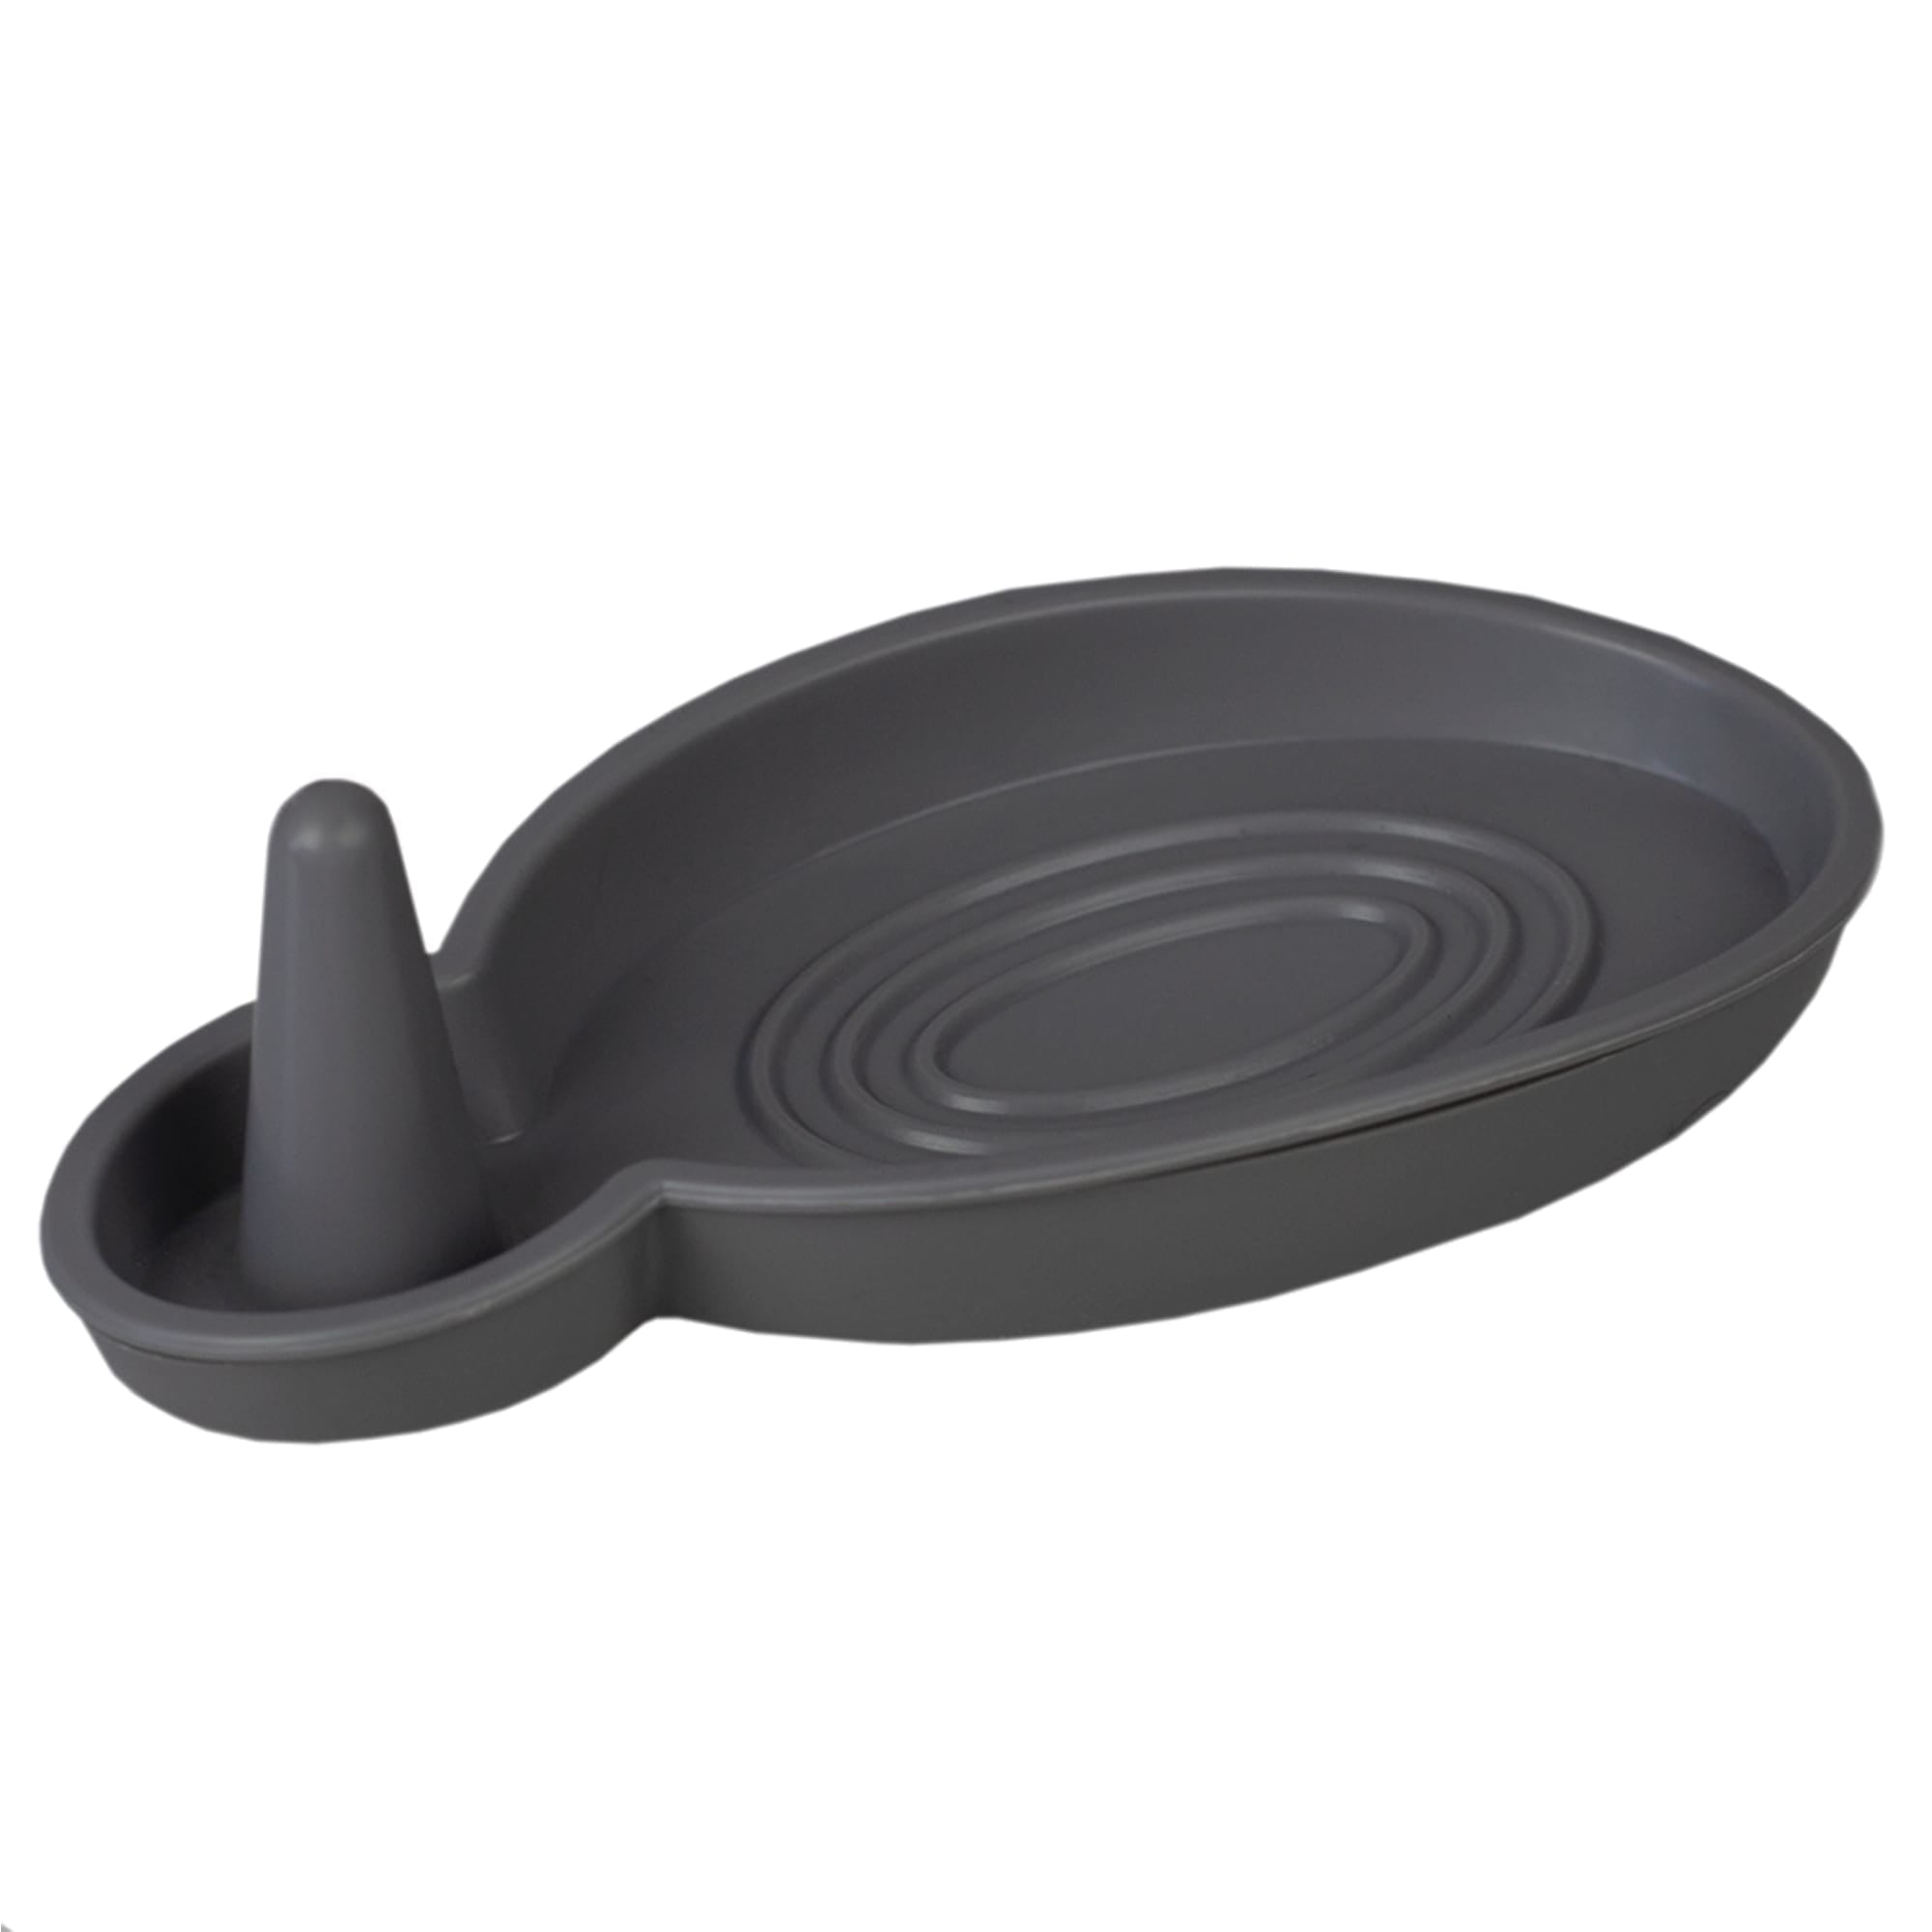 Home Basics Silicone Soap Dish and Ring Holder, Grey $1.50 EACH, CASE PACK OF 24